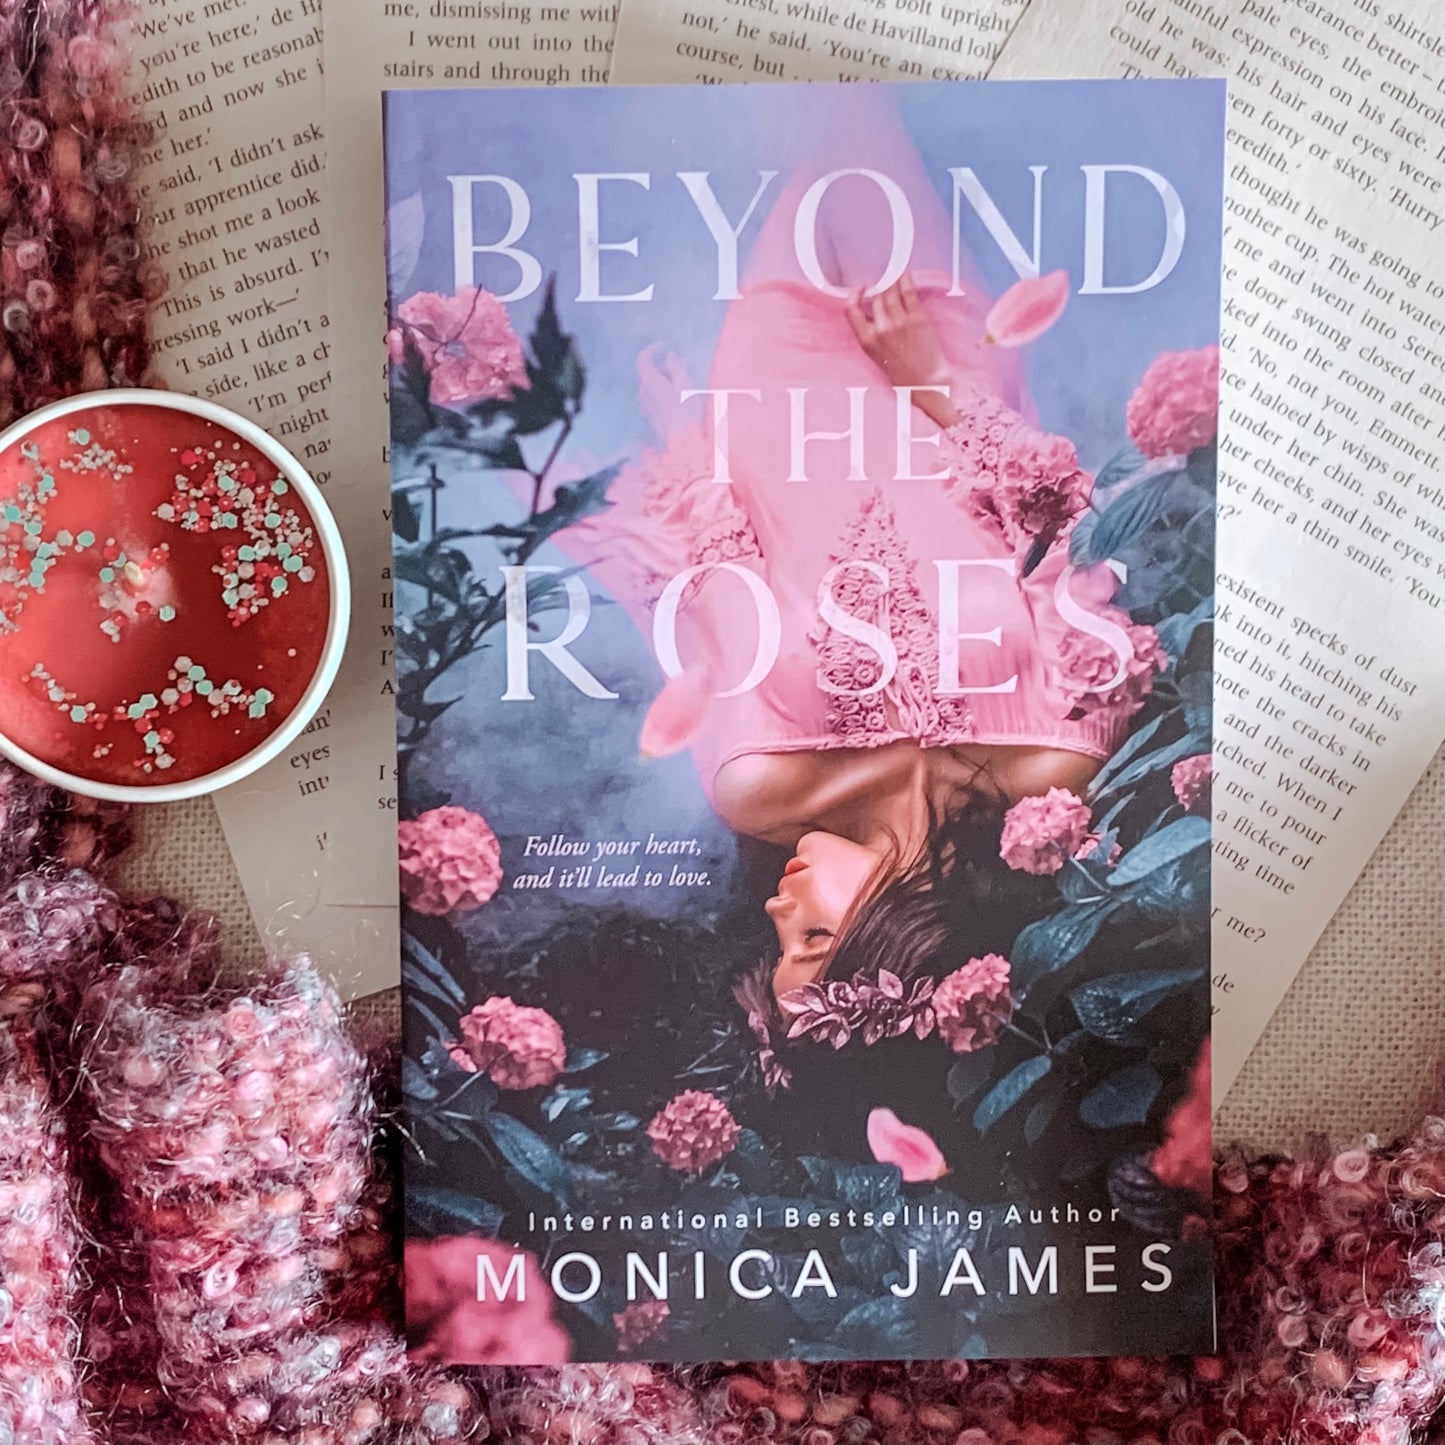 Beyond the Roses by Monica James